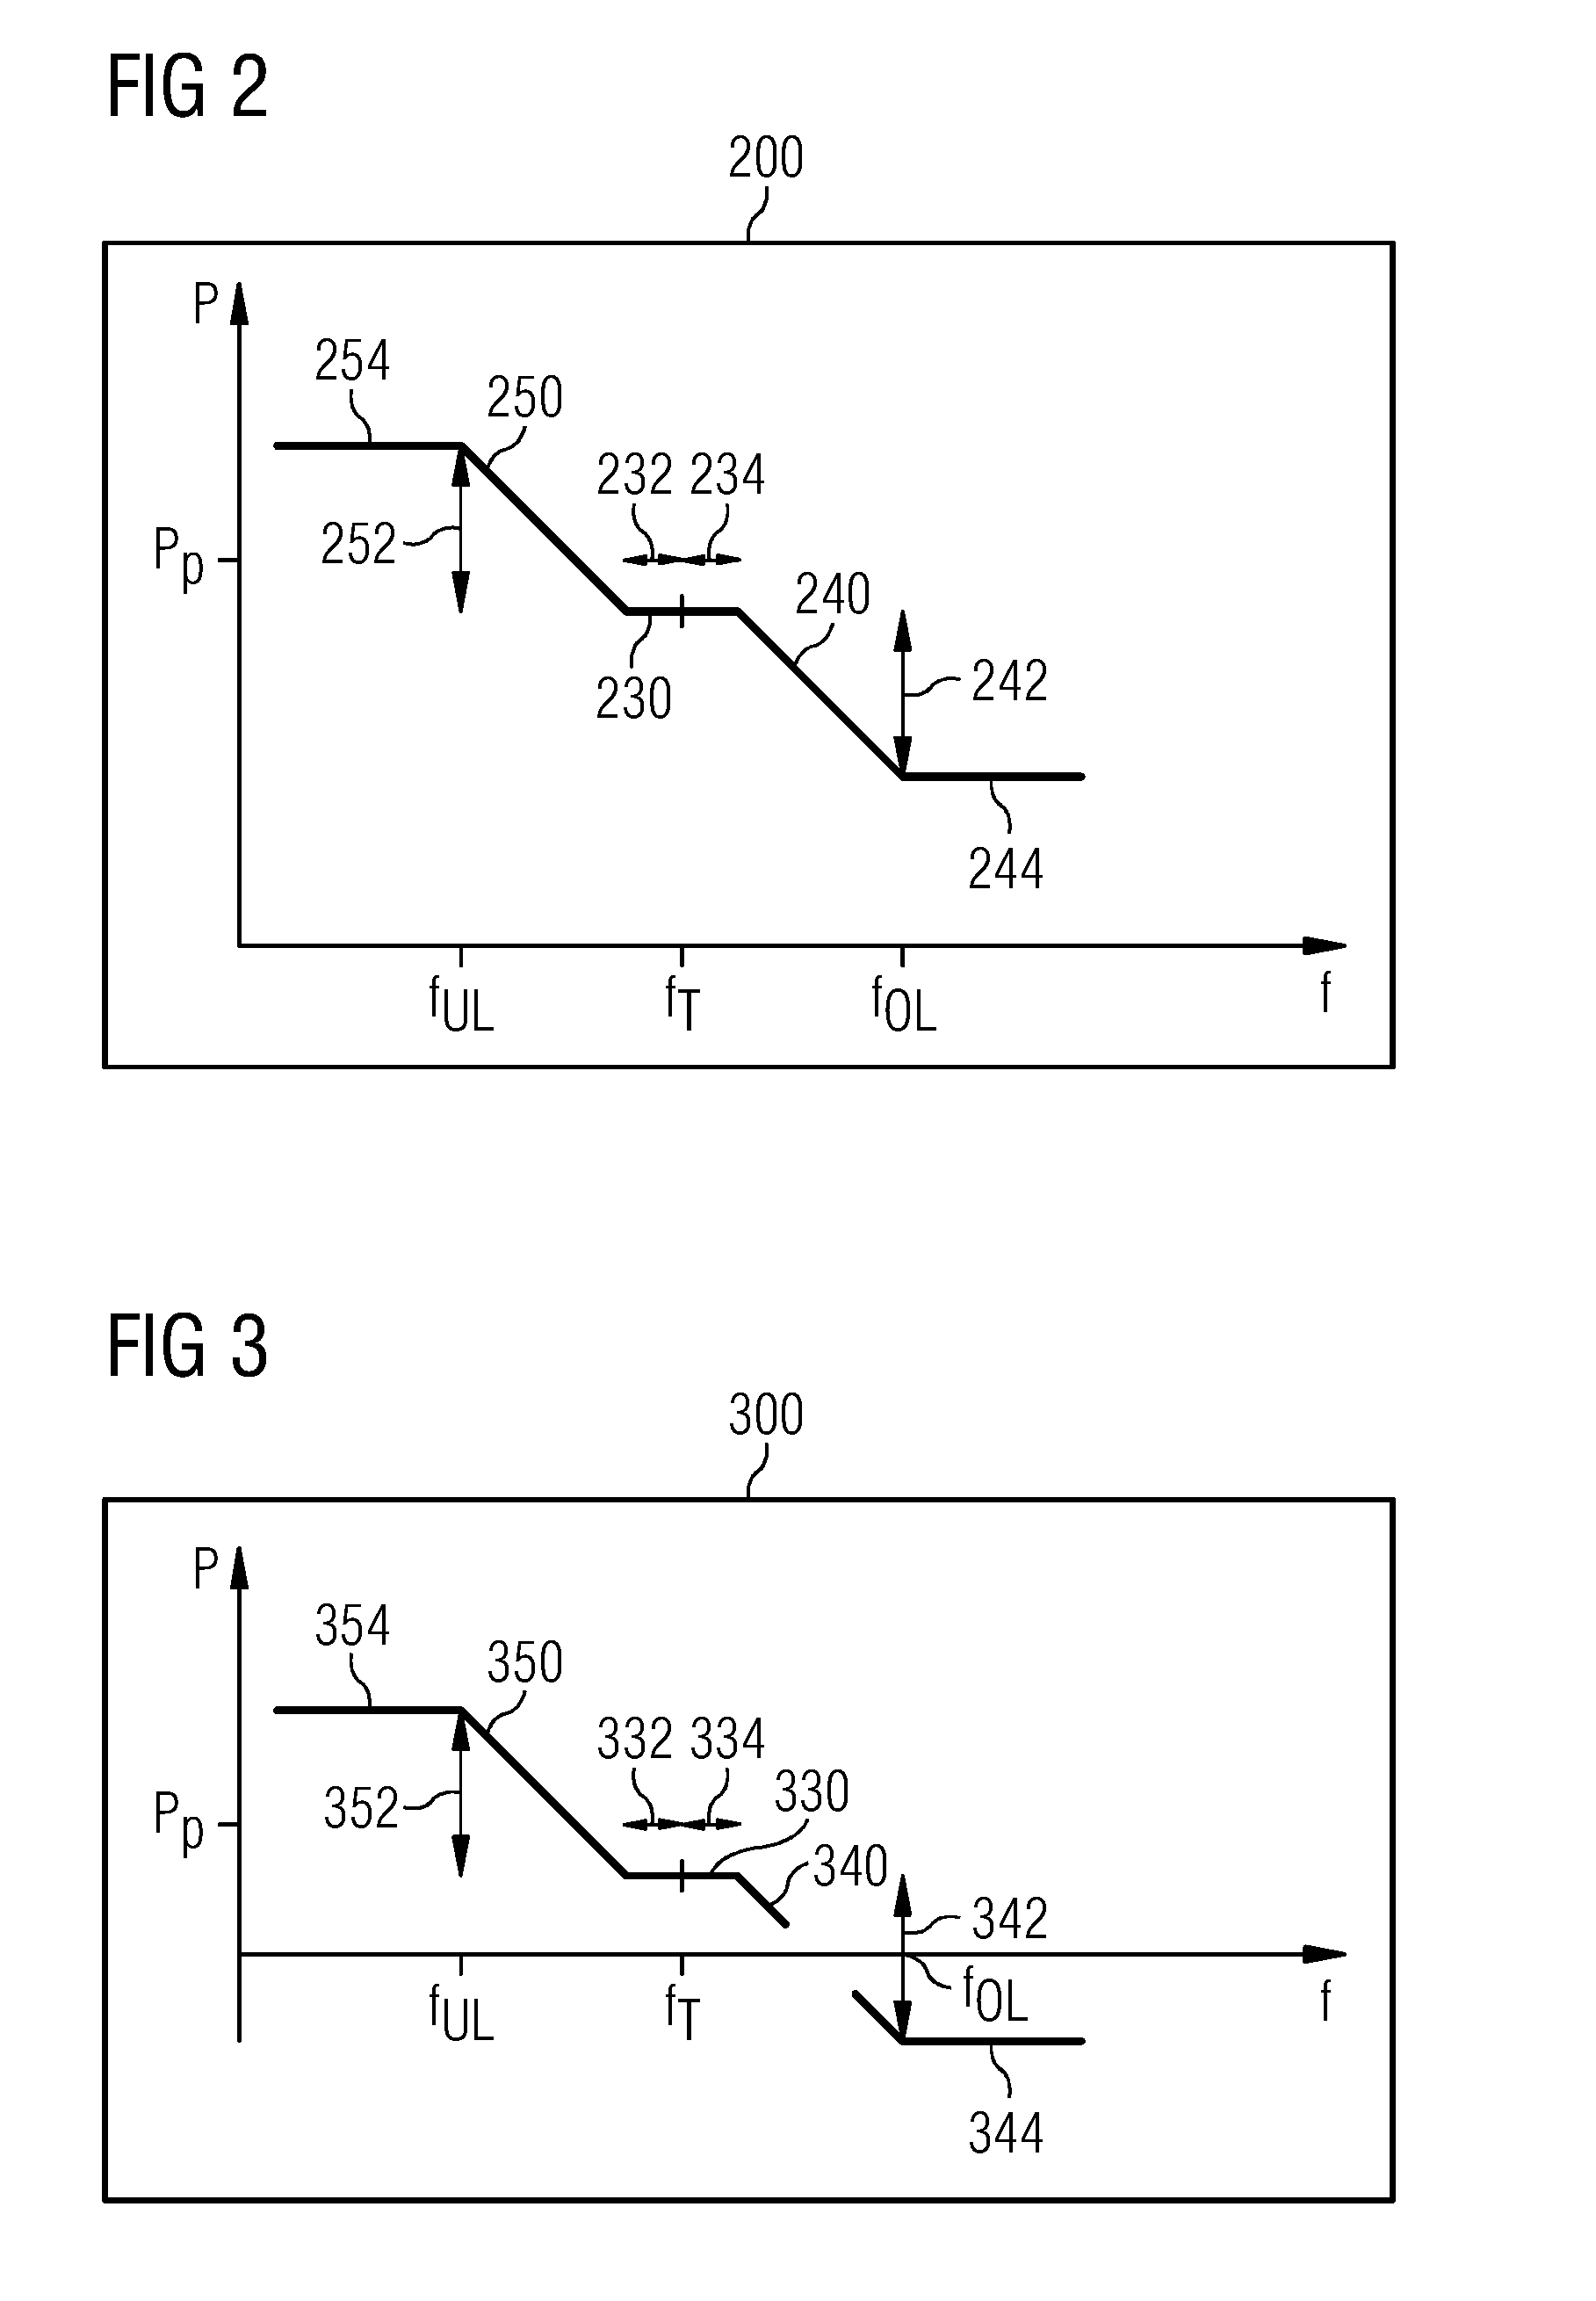 Controlling wind power plant with negative power capability to respond to grid frequency instability